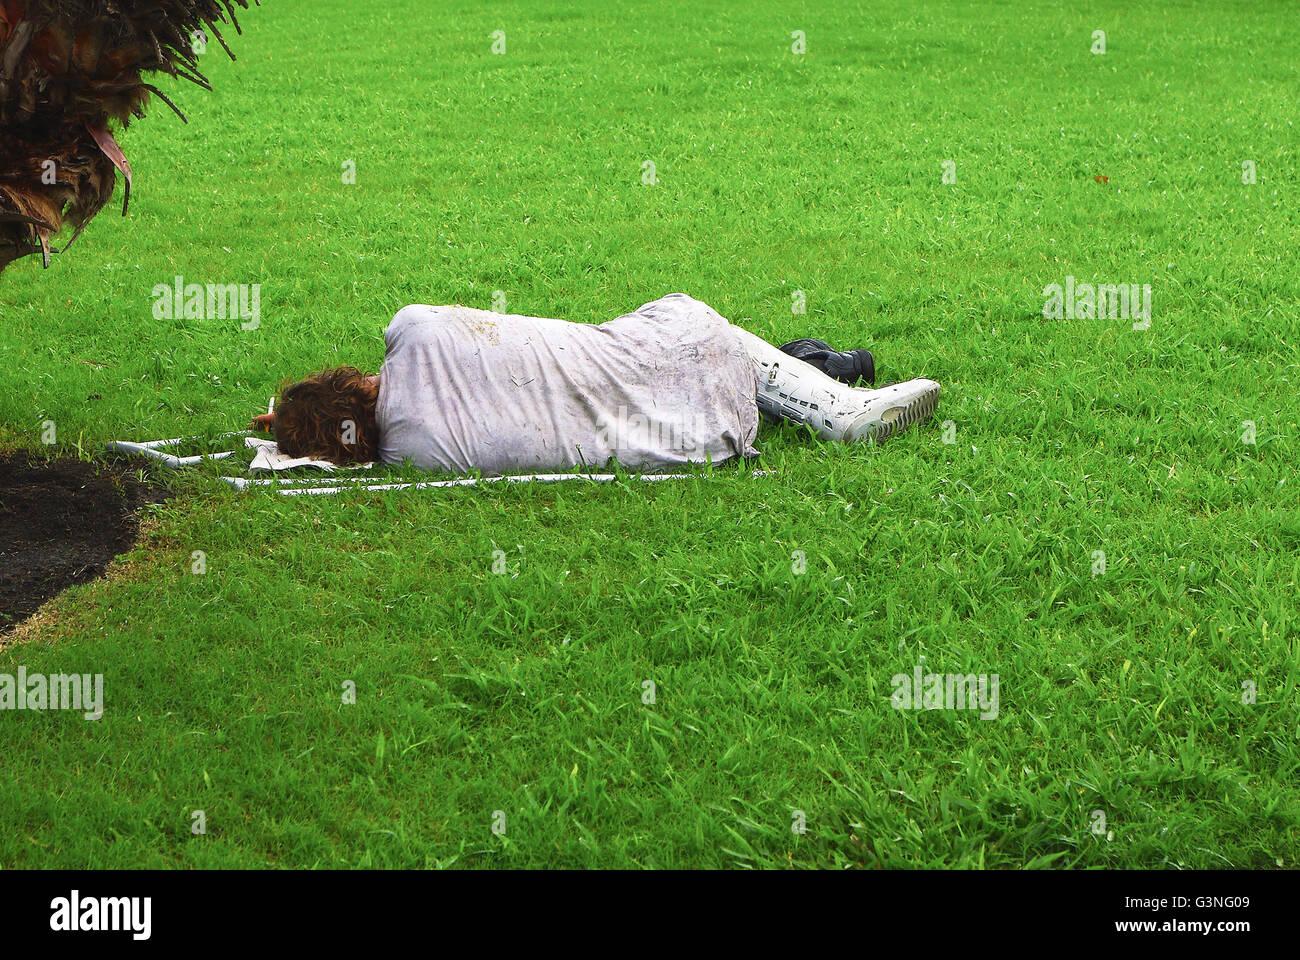 Homeless? man with broken leg sleeping on the grass with lit sigarette Stock Photo